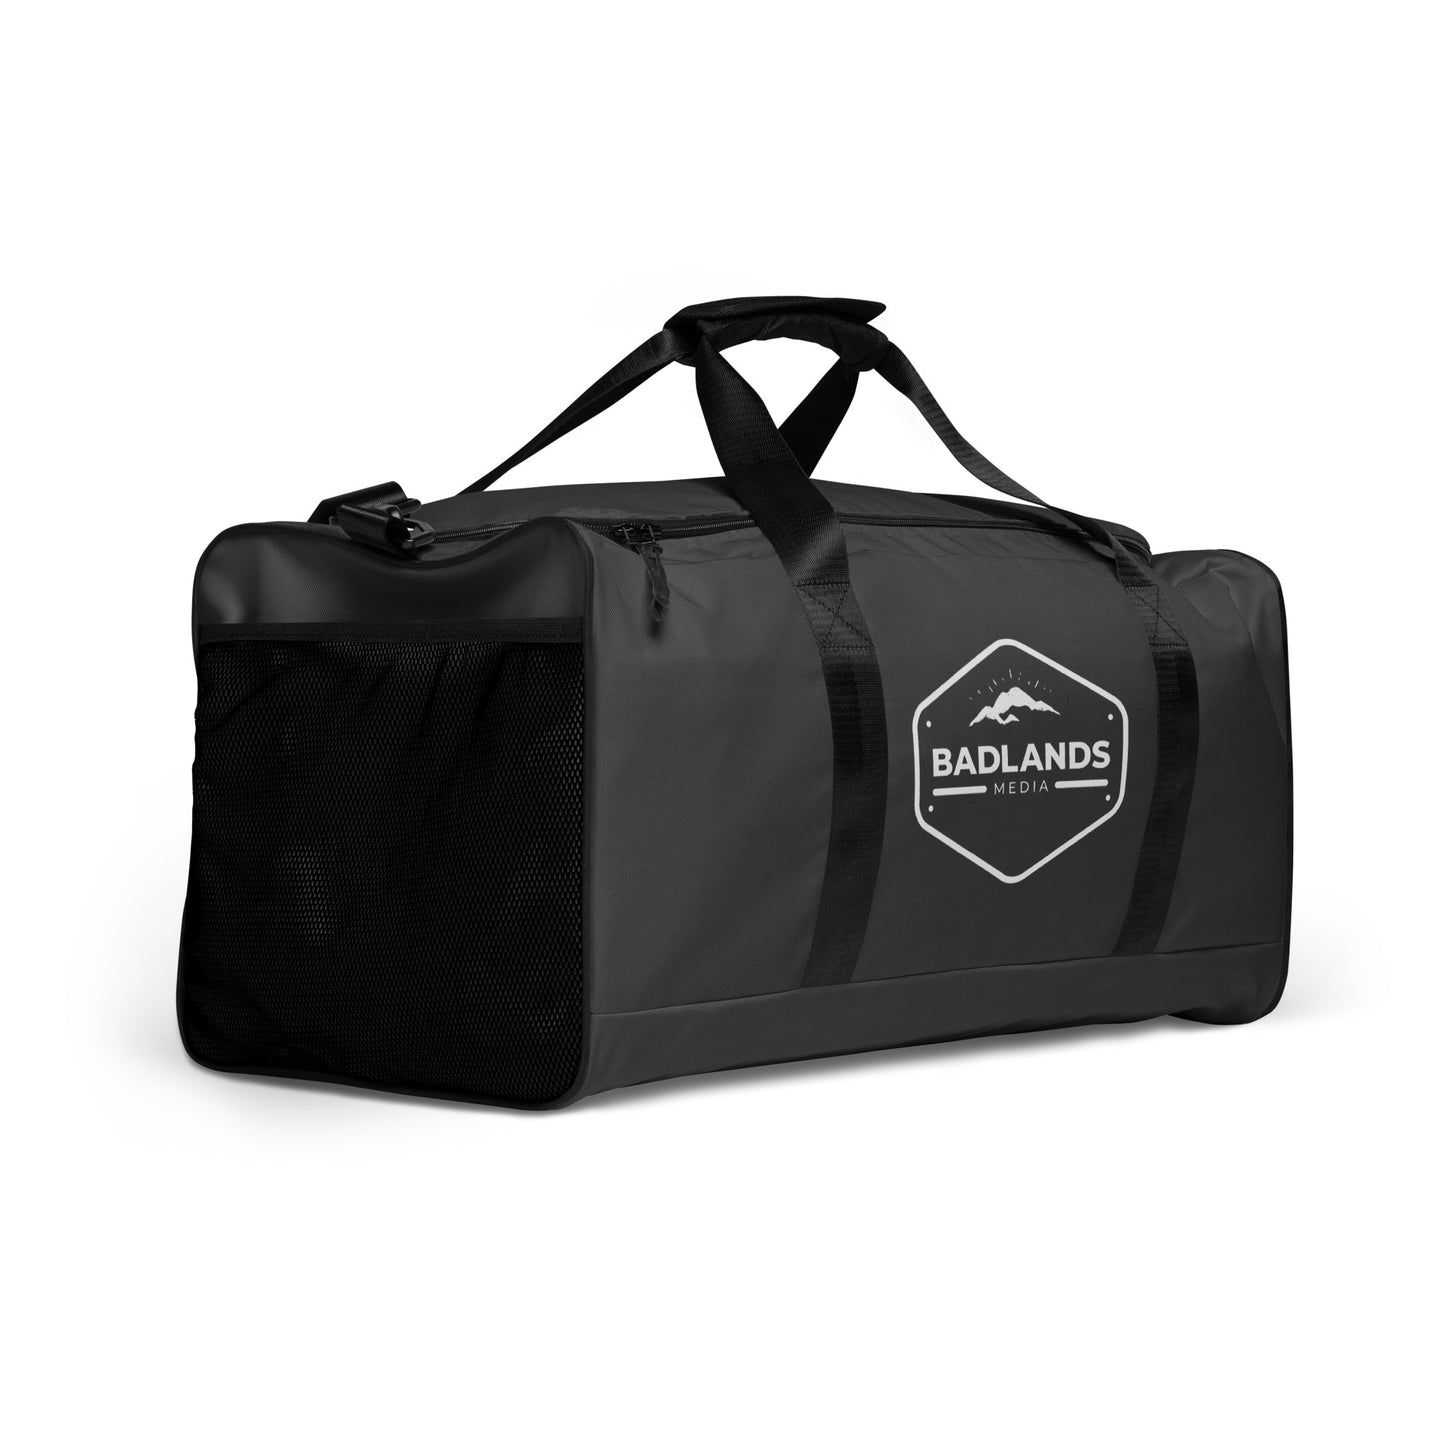 Badlands Extra Large Duffle Bag in charcoal